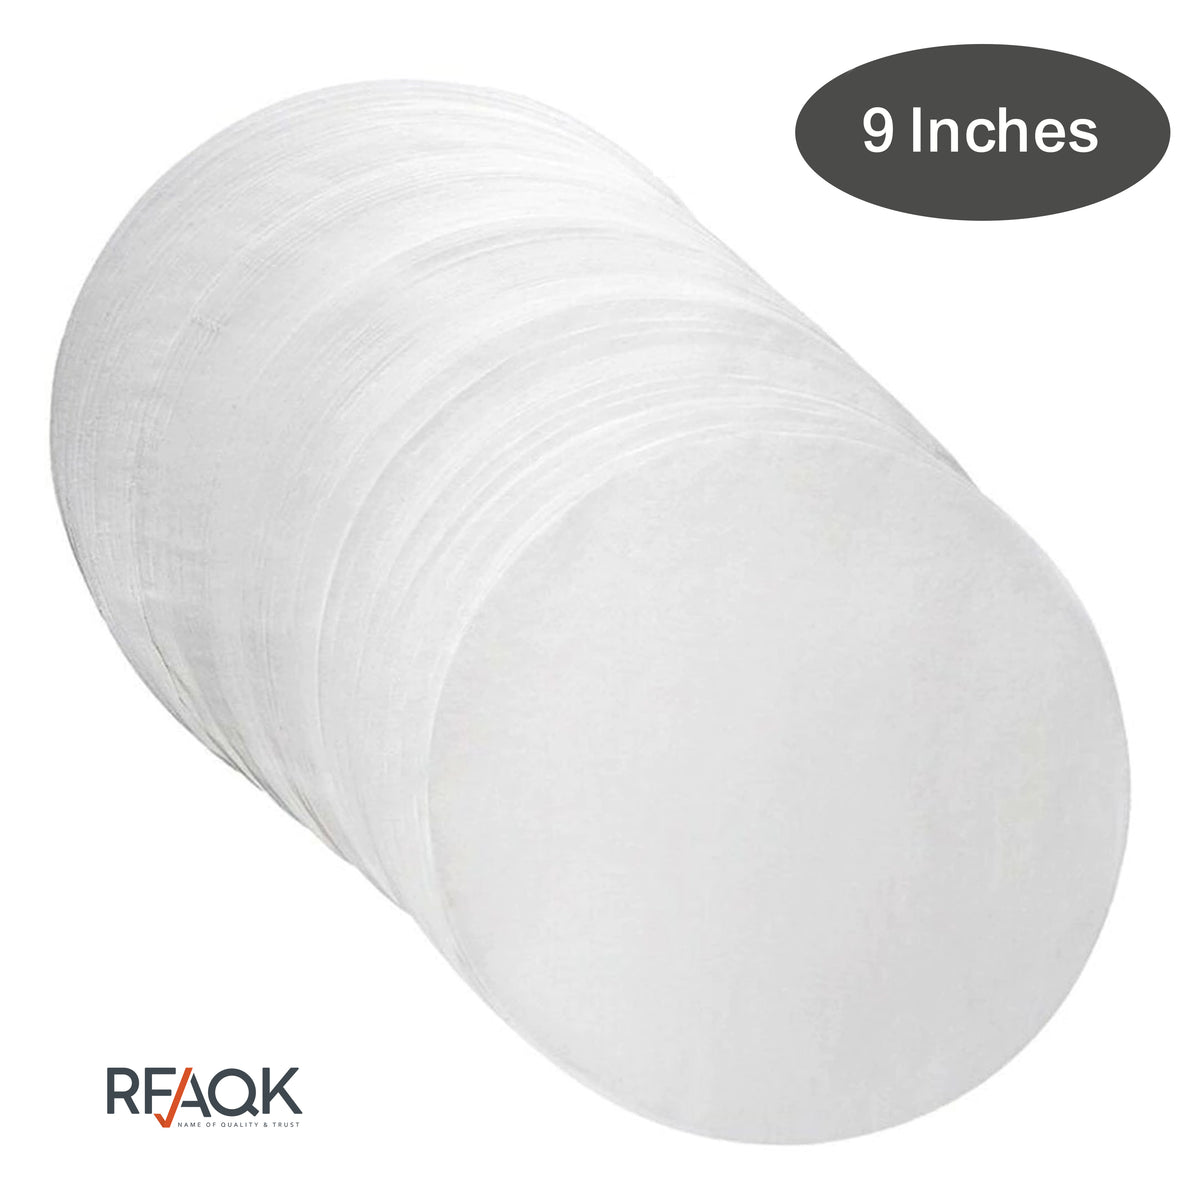 100 pcs parchment papers (9 inches) - RFAQK Cake Baking Accessories